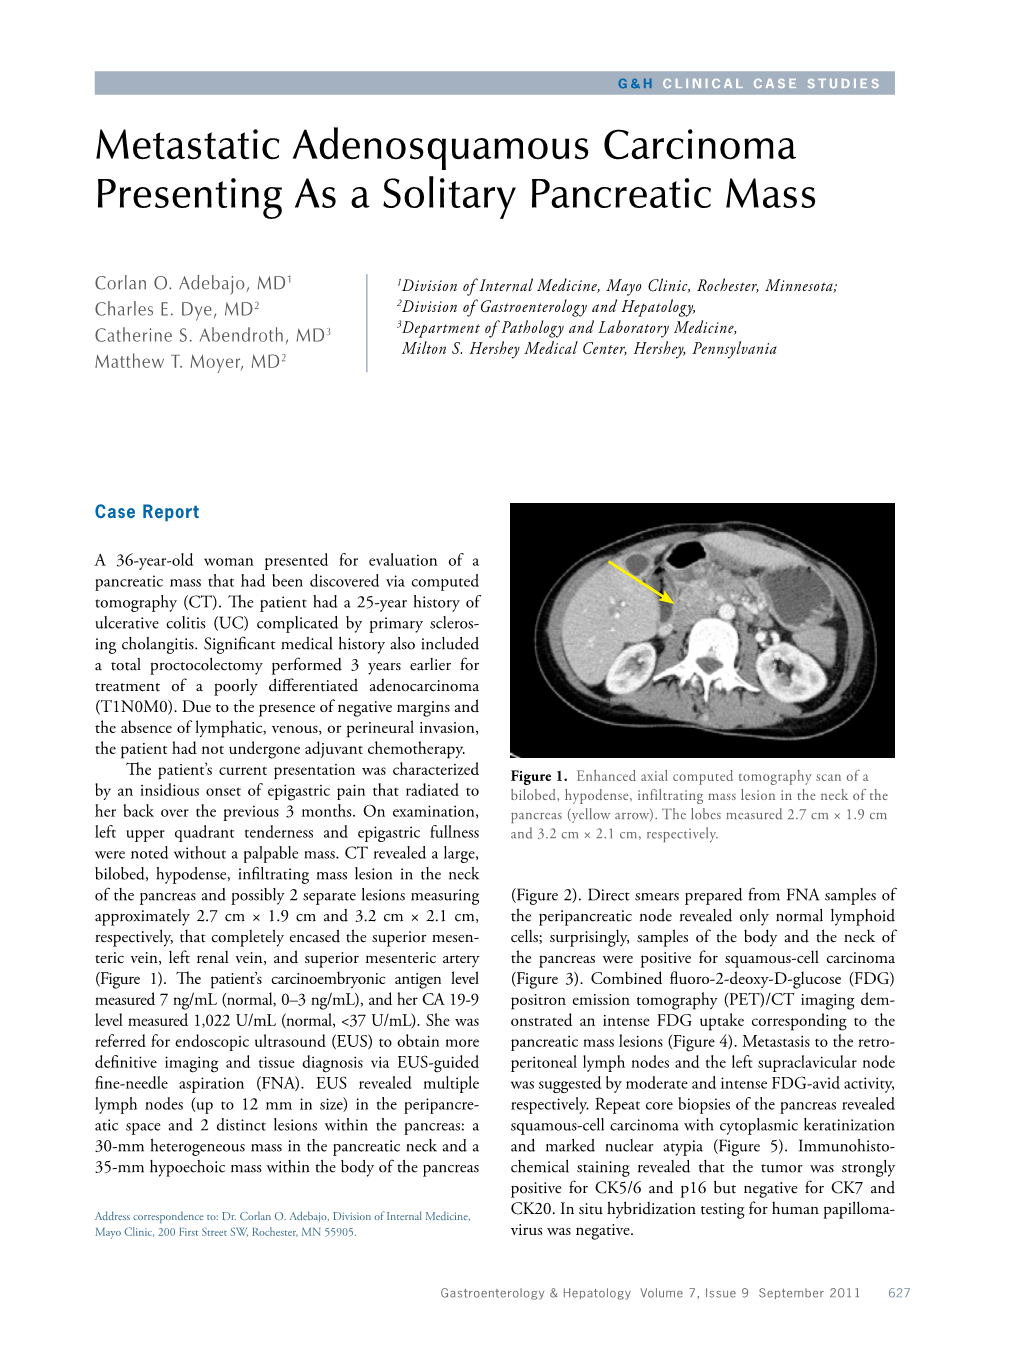 Metastatic Adenosquamous Carcinoma Presenting As a Solitary Pancreatic Mass